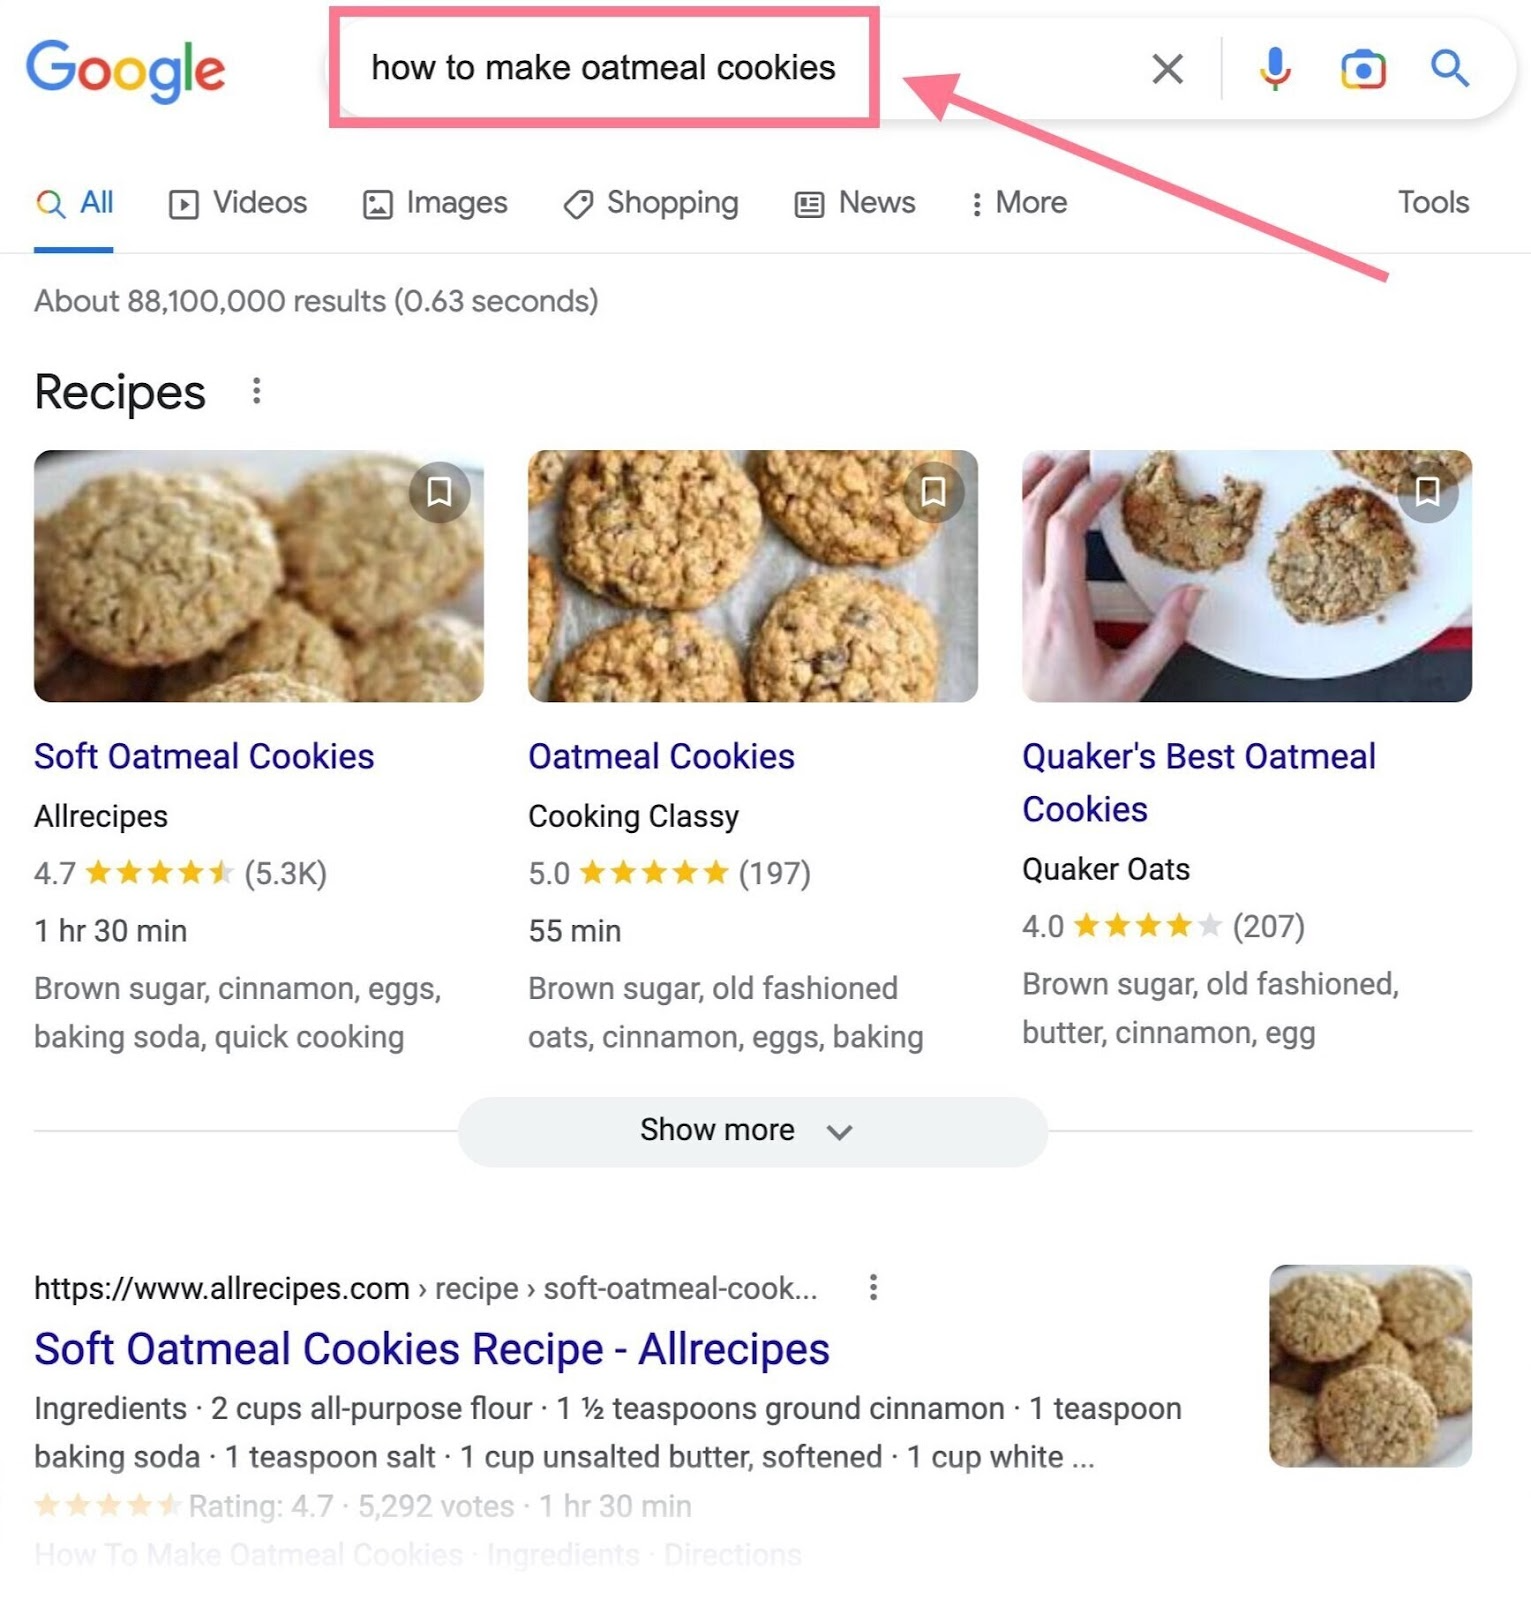 The search results for “how to make oatmeal cookies”